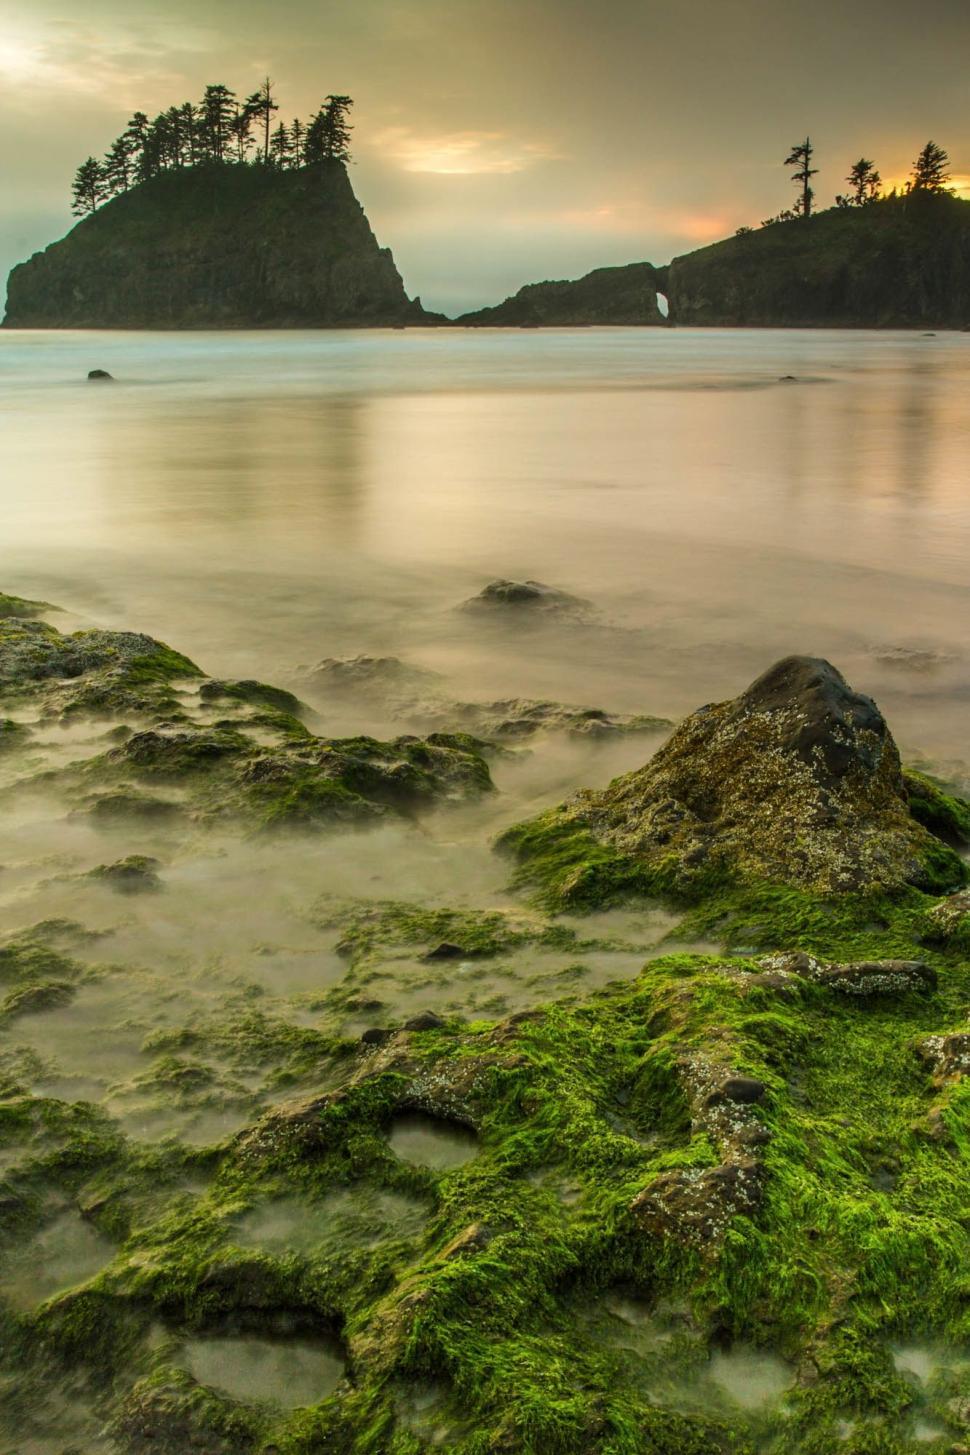 Free Image of Algae-Covered Beach Under Cloudy Sky 